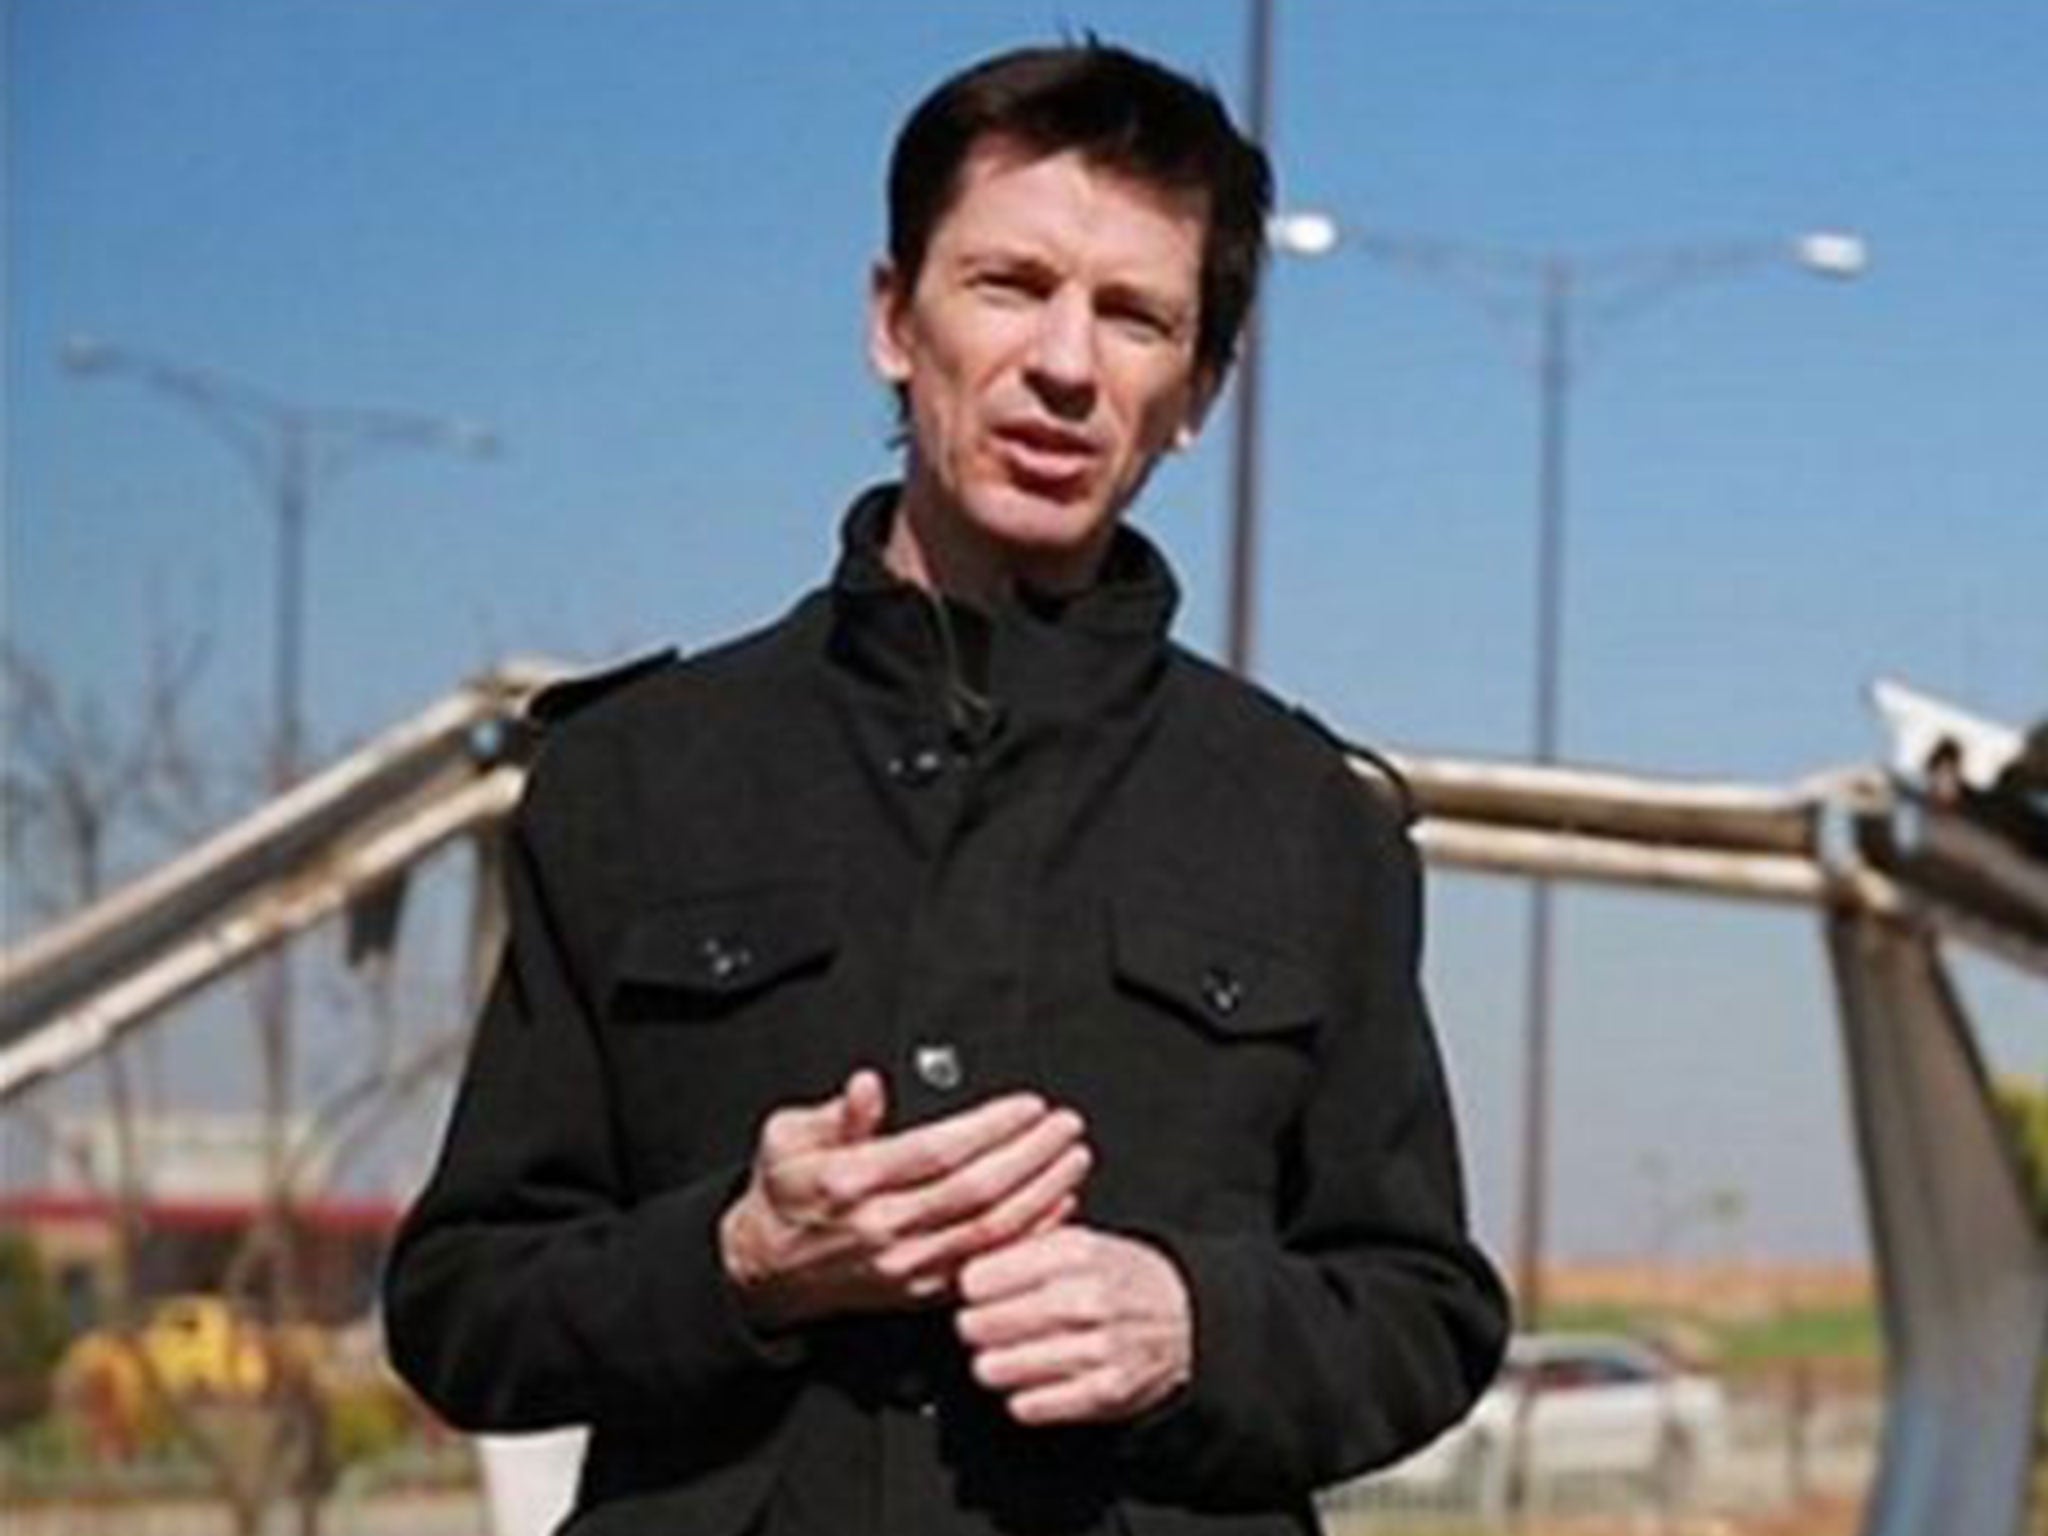 In the latest video, British photojournalist John Cantlie appears gaunt as he ridicules US attempts to destroy the jihadi group